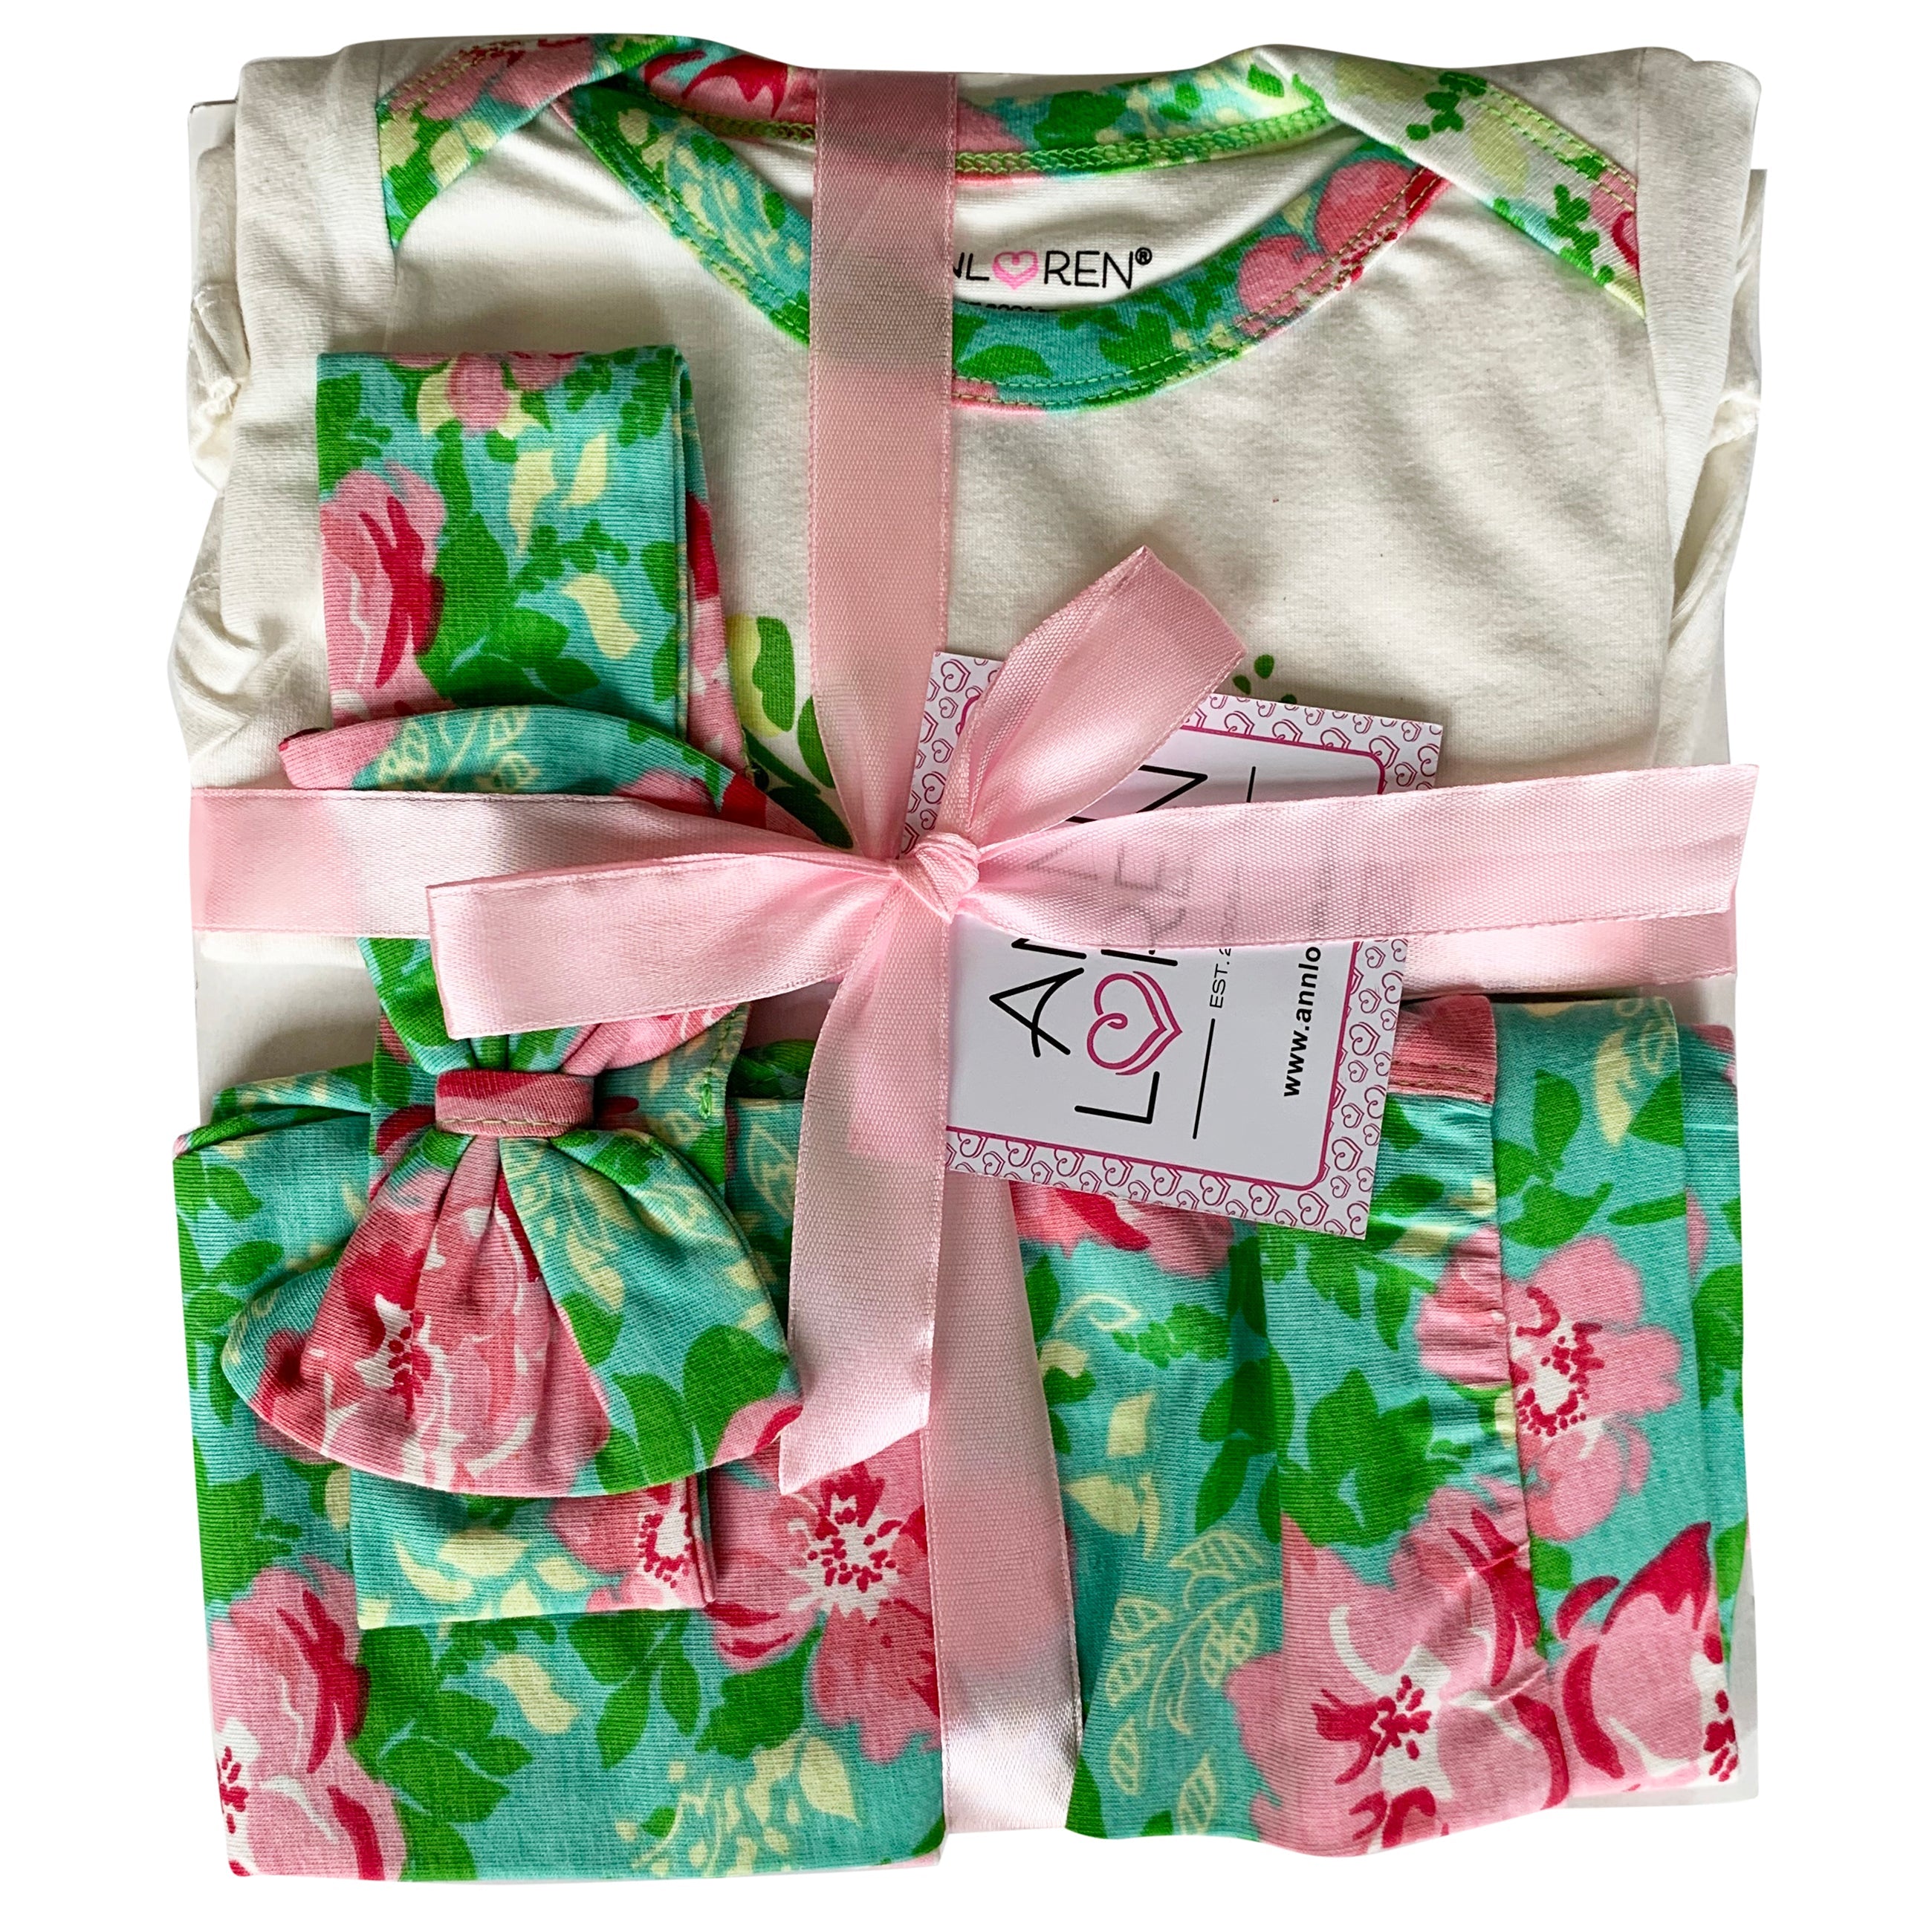 Floral Layette Gift Set for Girls